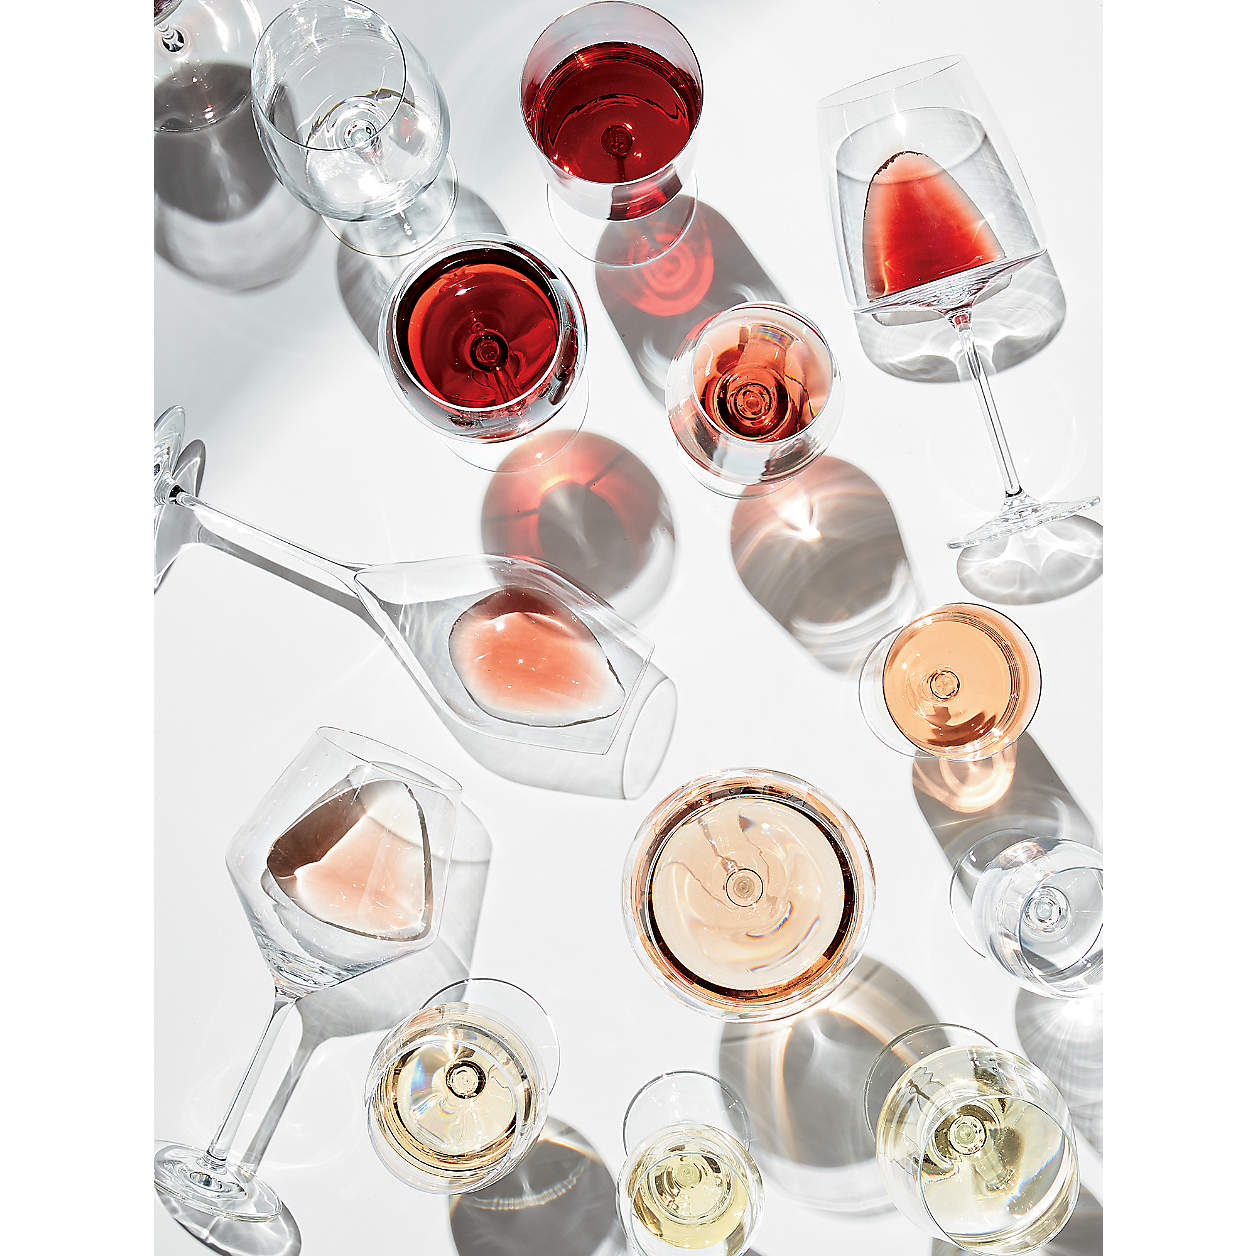 An array of wine glasses from red to white